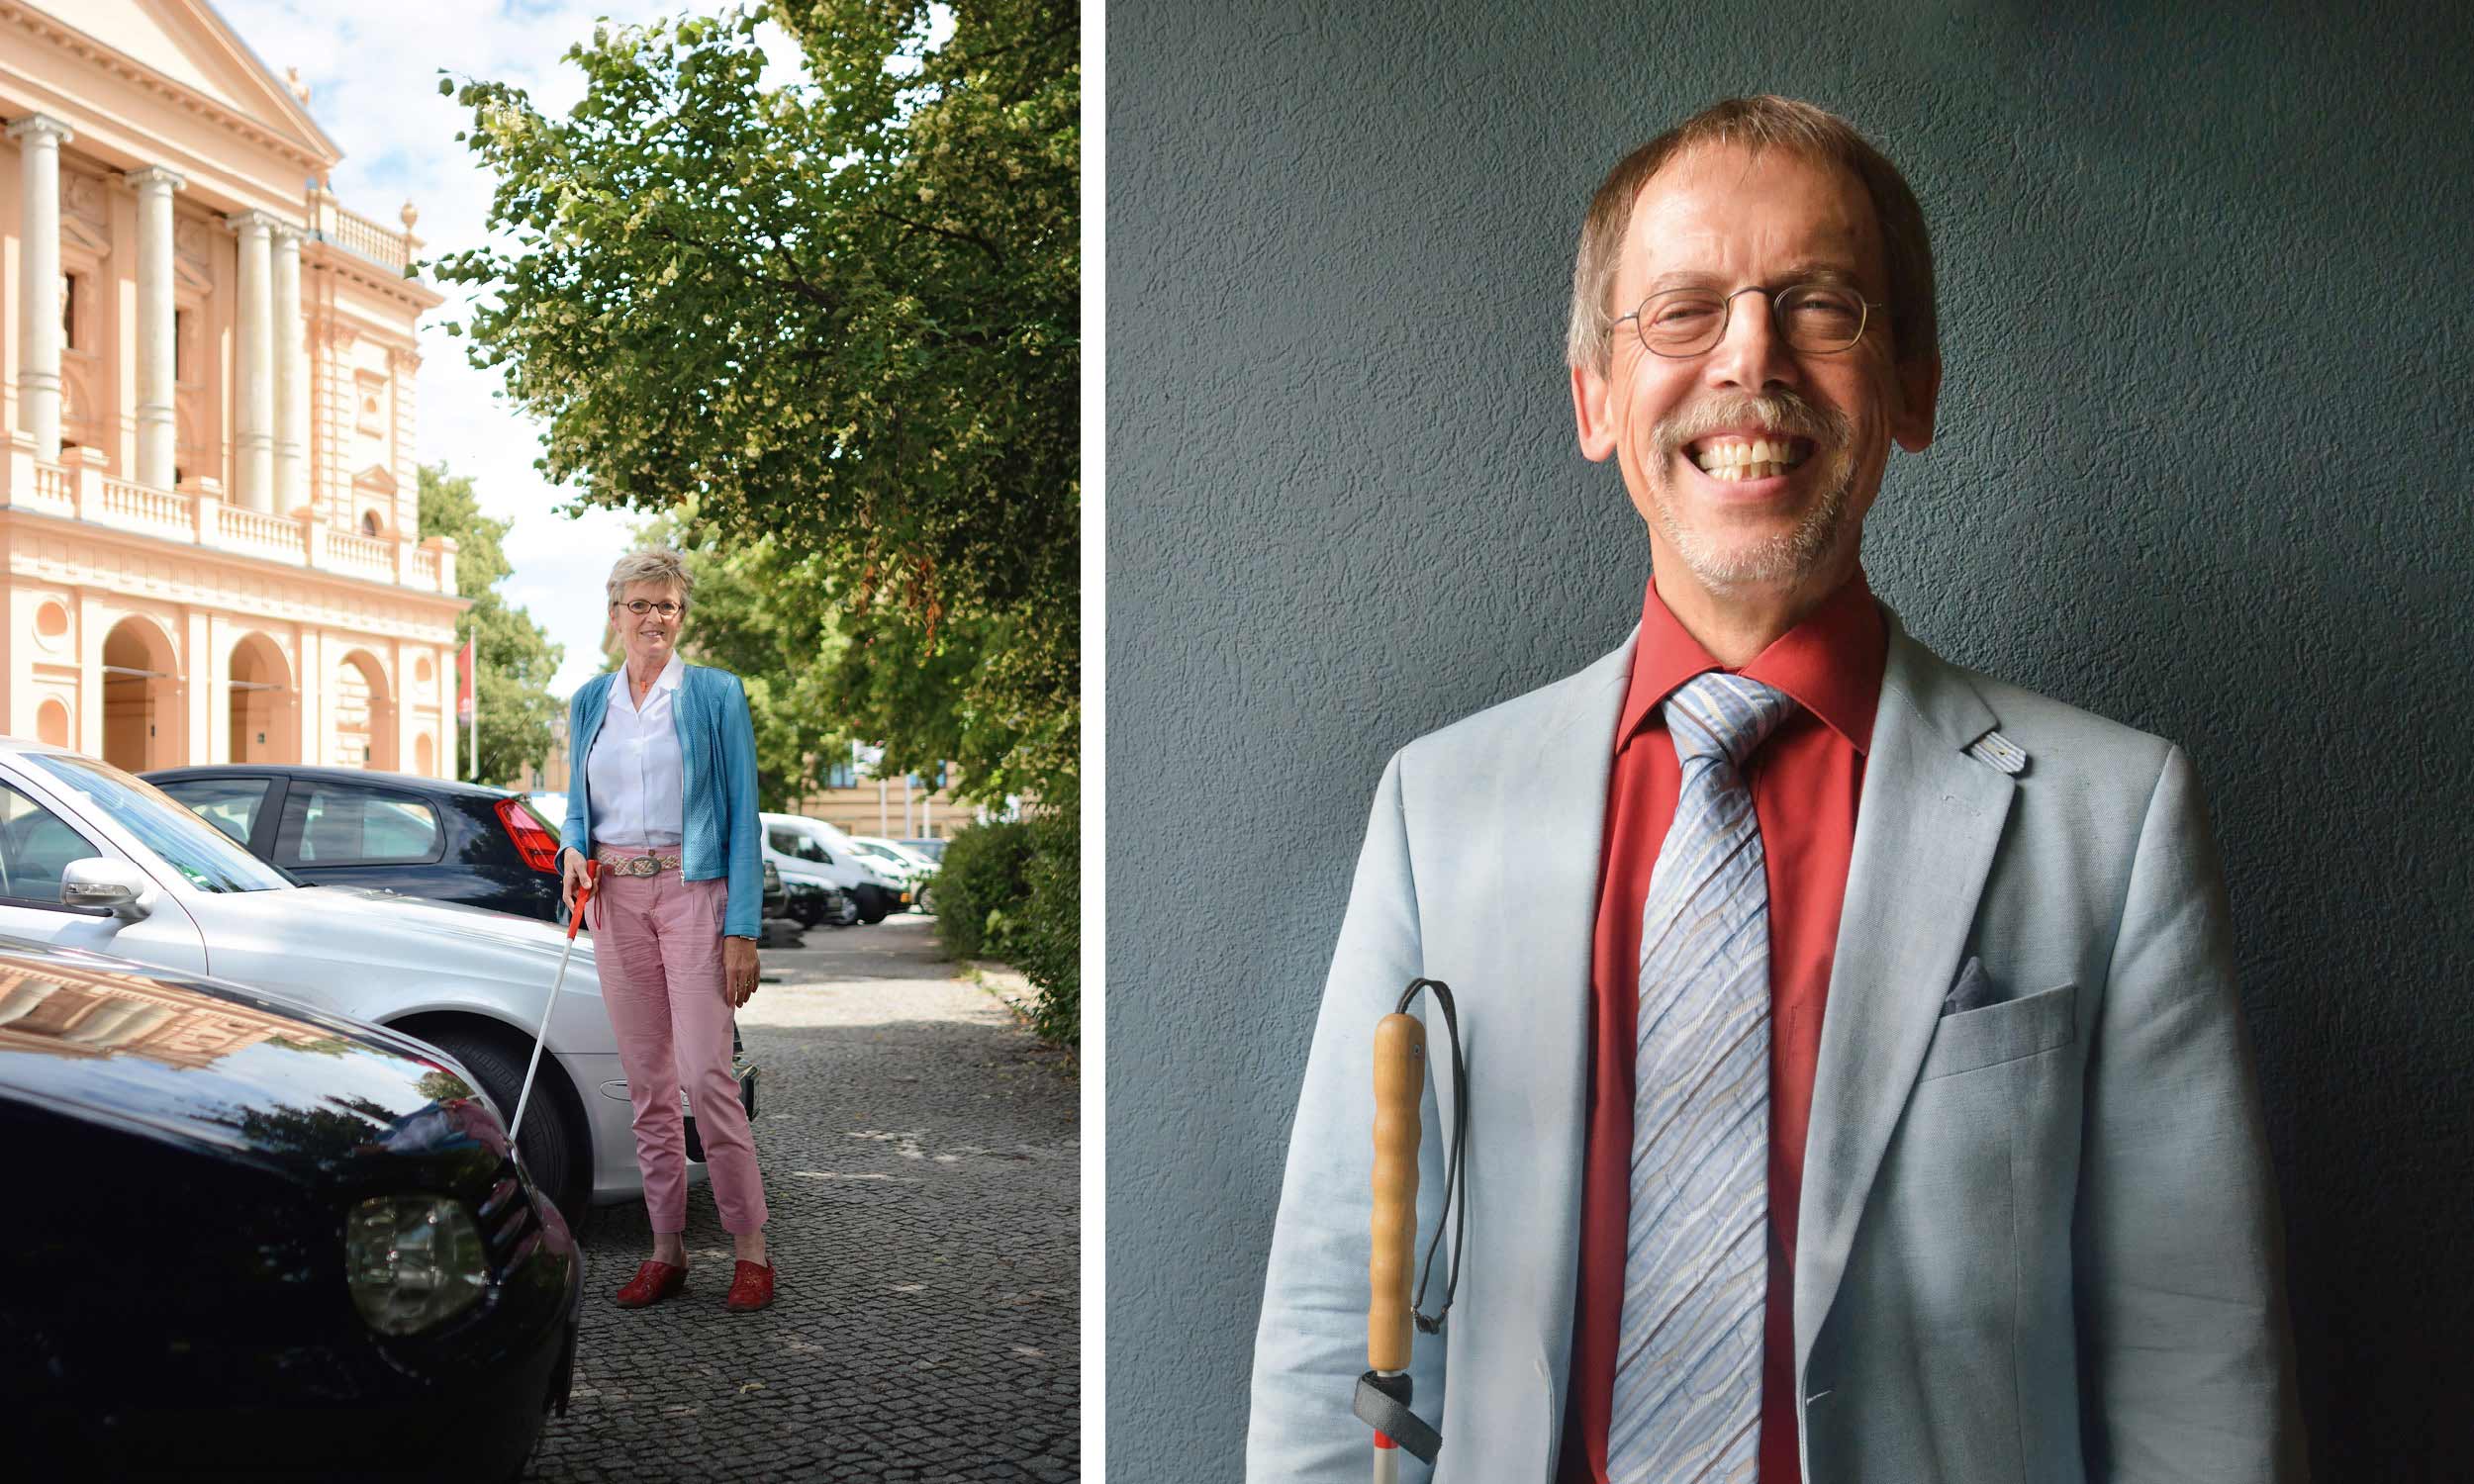 Two individual photos arranged side by side: On the left, Mrs Renate Reymann next to parked cars in front of the theatre in Schwerin. On the right, a portrait of a friendly smiling Klaus Hahn in front of a grey wall.